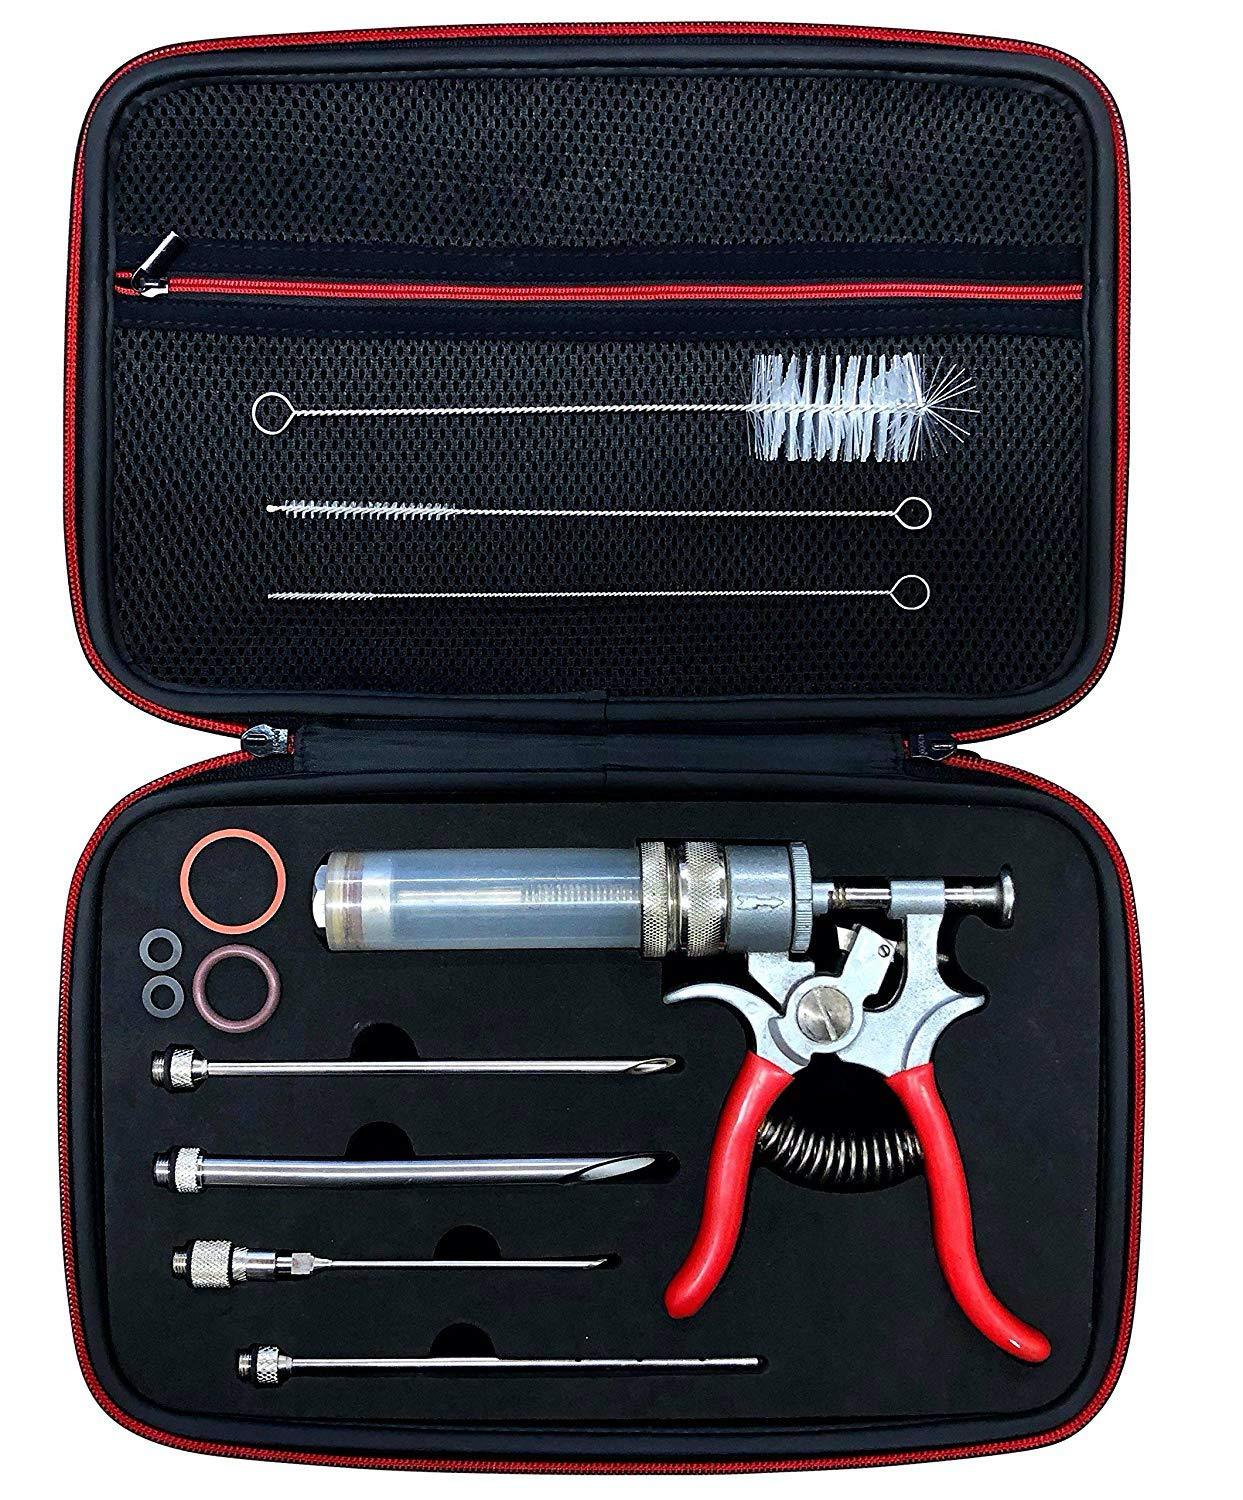 SPITJACK Magnum Meat Injector Gun. Food Flavor Injection Syringe for Smoked BBQ Marinades and Meat Seasoning. 4 Needles for Pork Butt, Beef Brisket, Turkey Breast. Deluxe Hard Case. Made in The USA. - CookCave